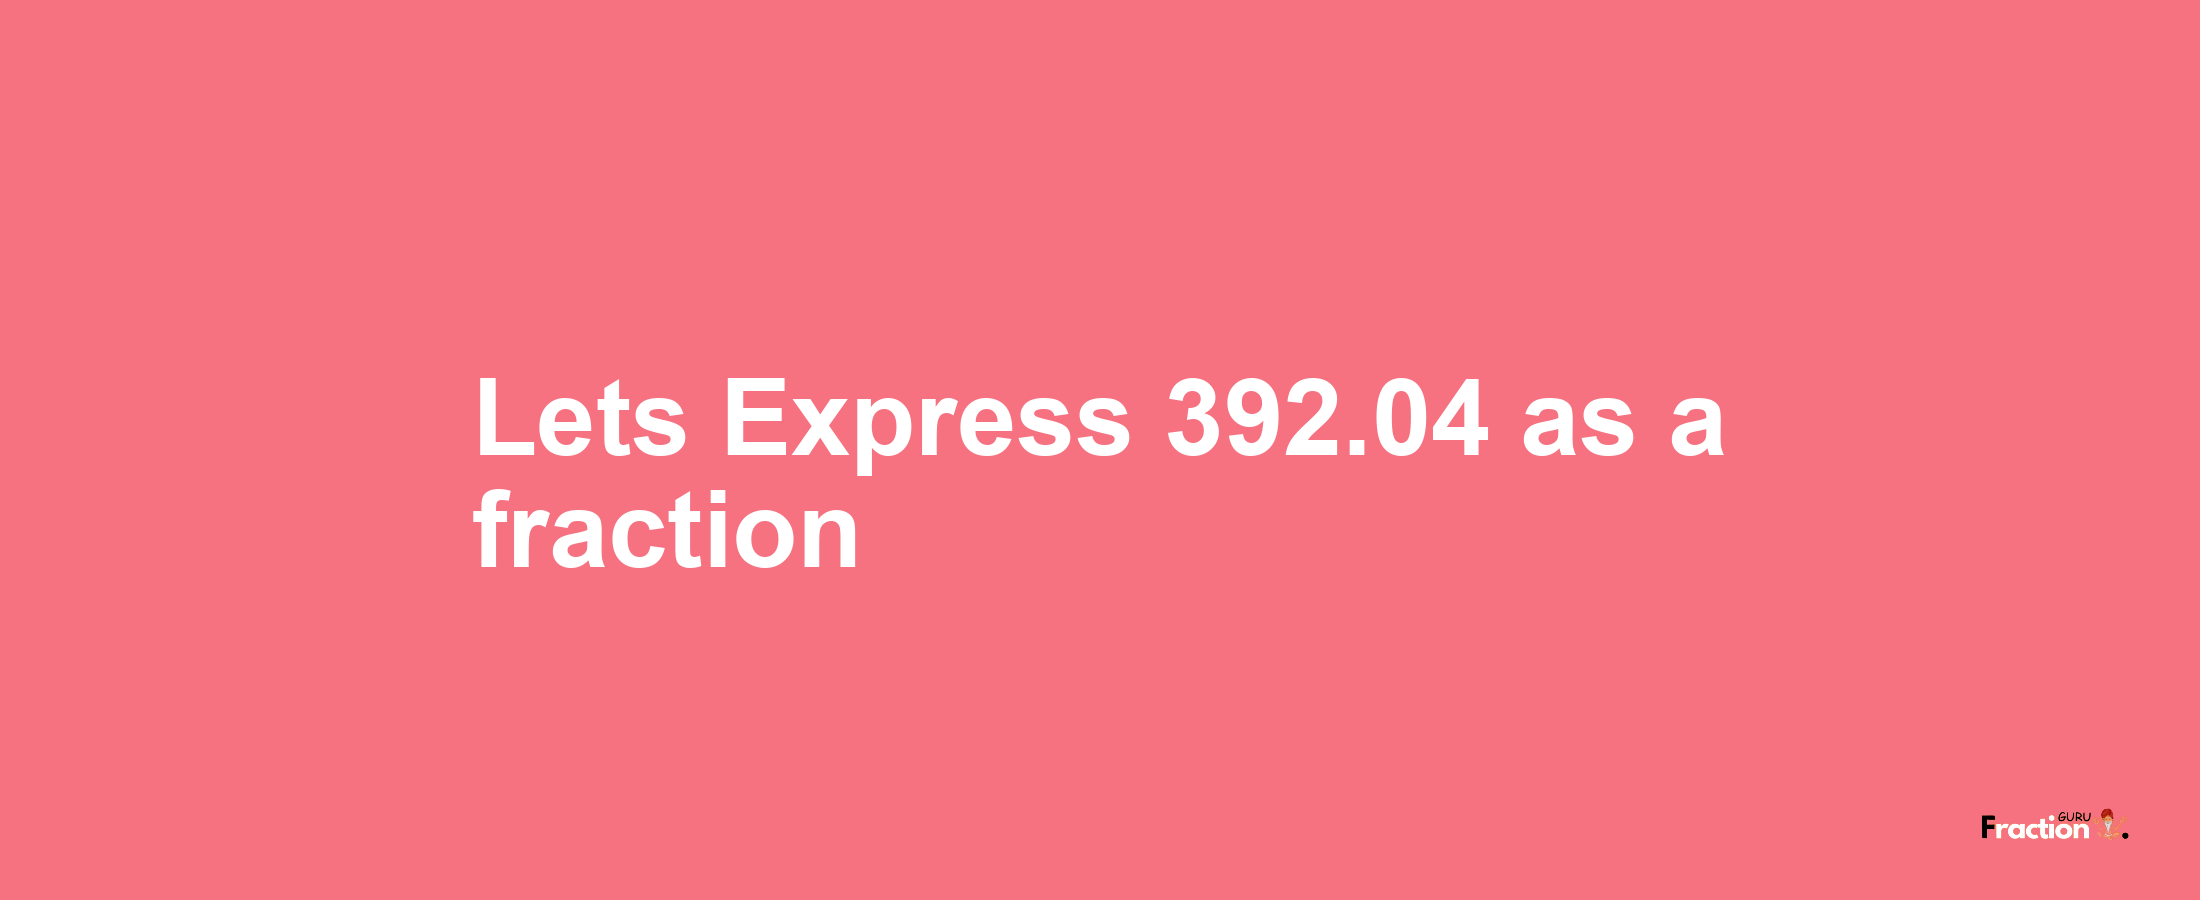 Lets Express 392.04 as afraction